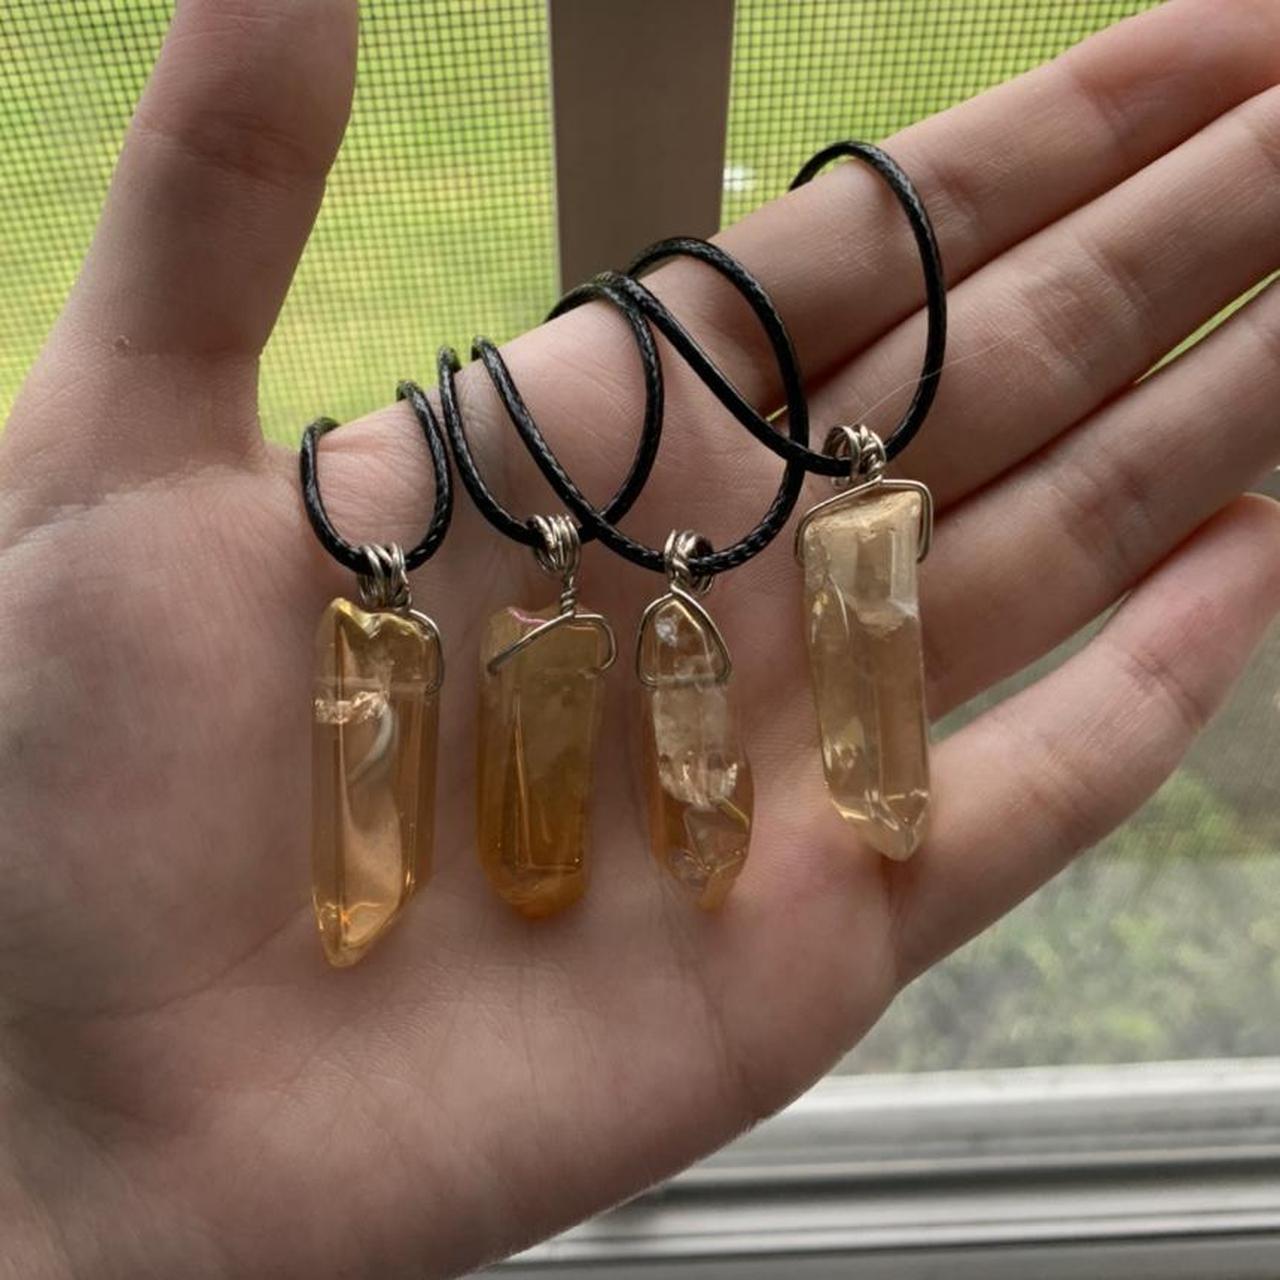 Citrine crystal cage necklace. Made with real - Depop